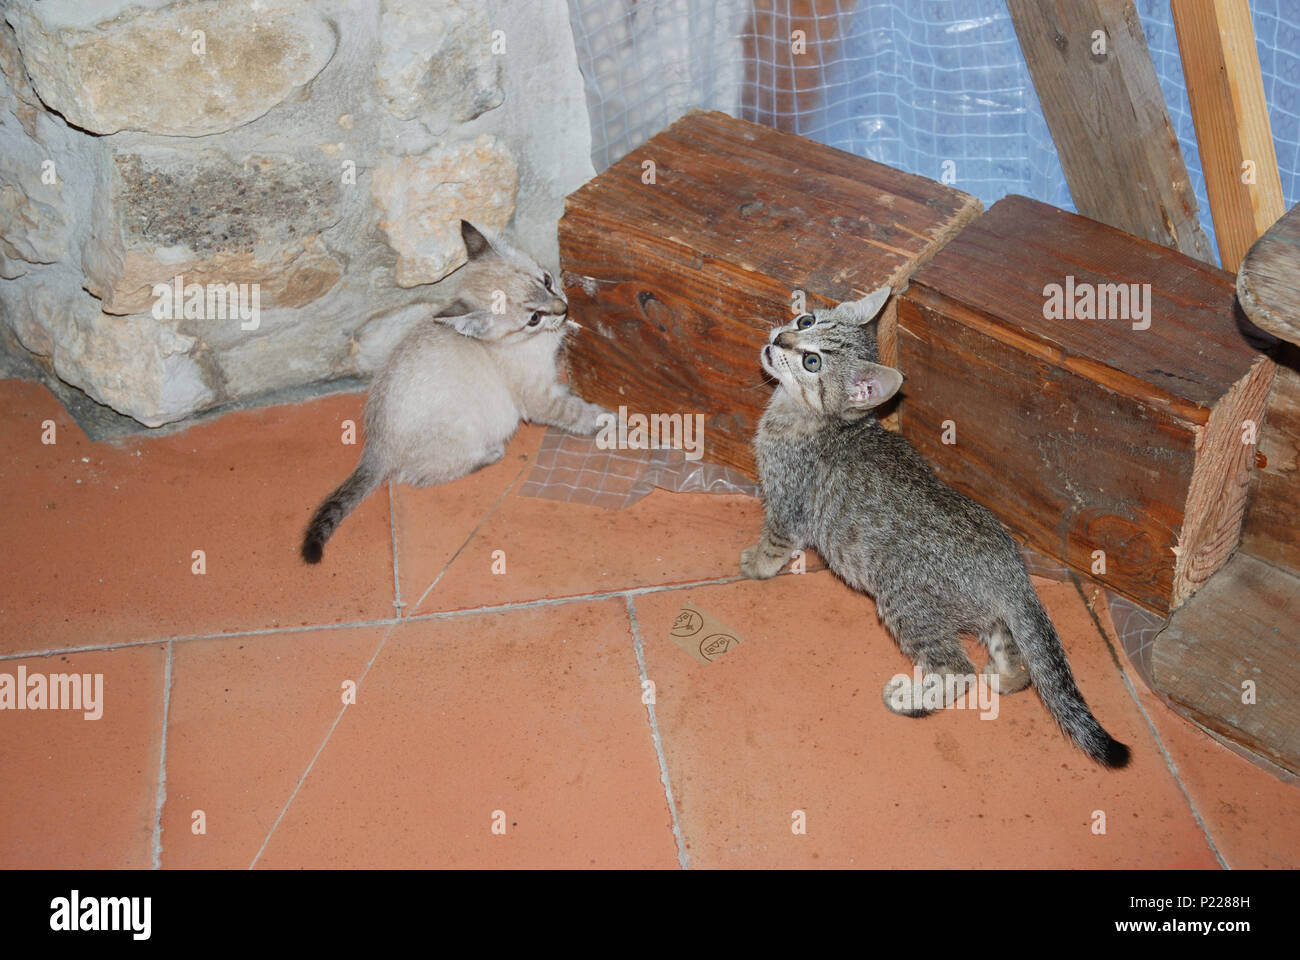 Two kittens. Stock Photo